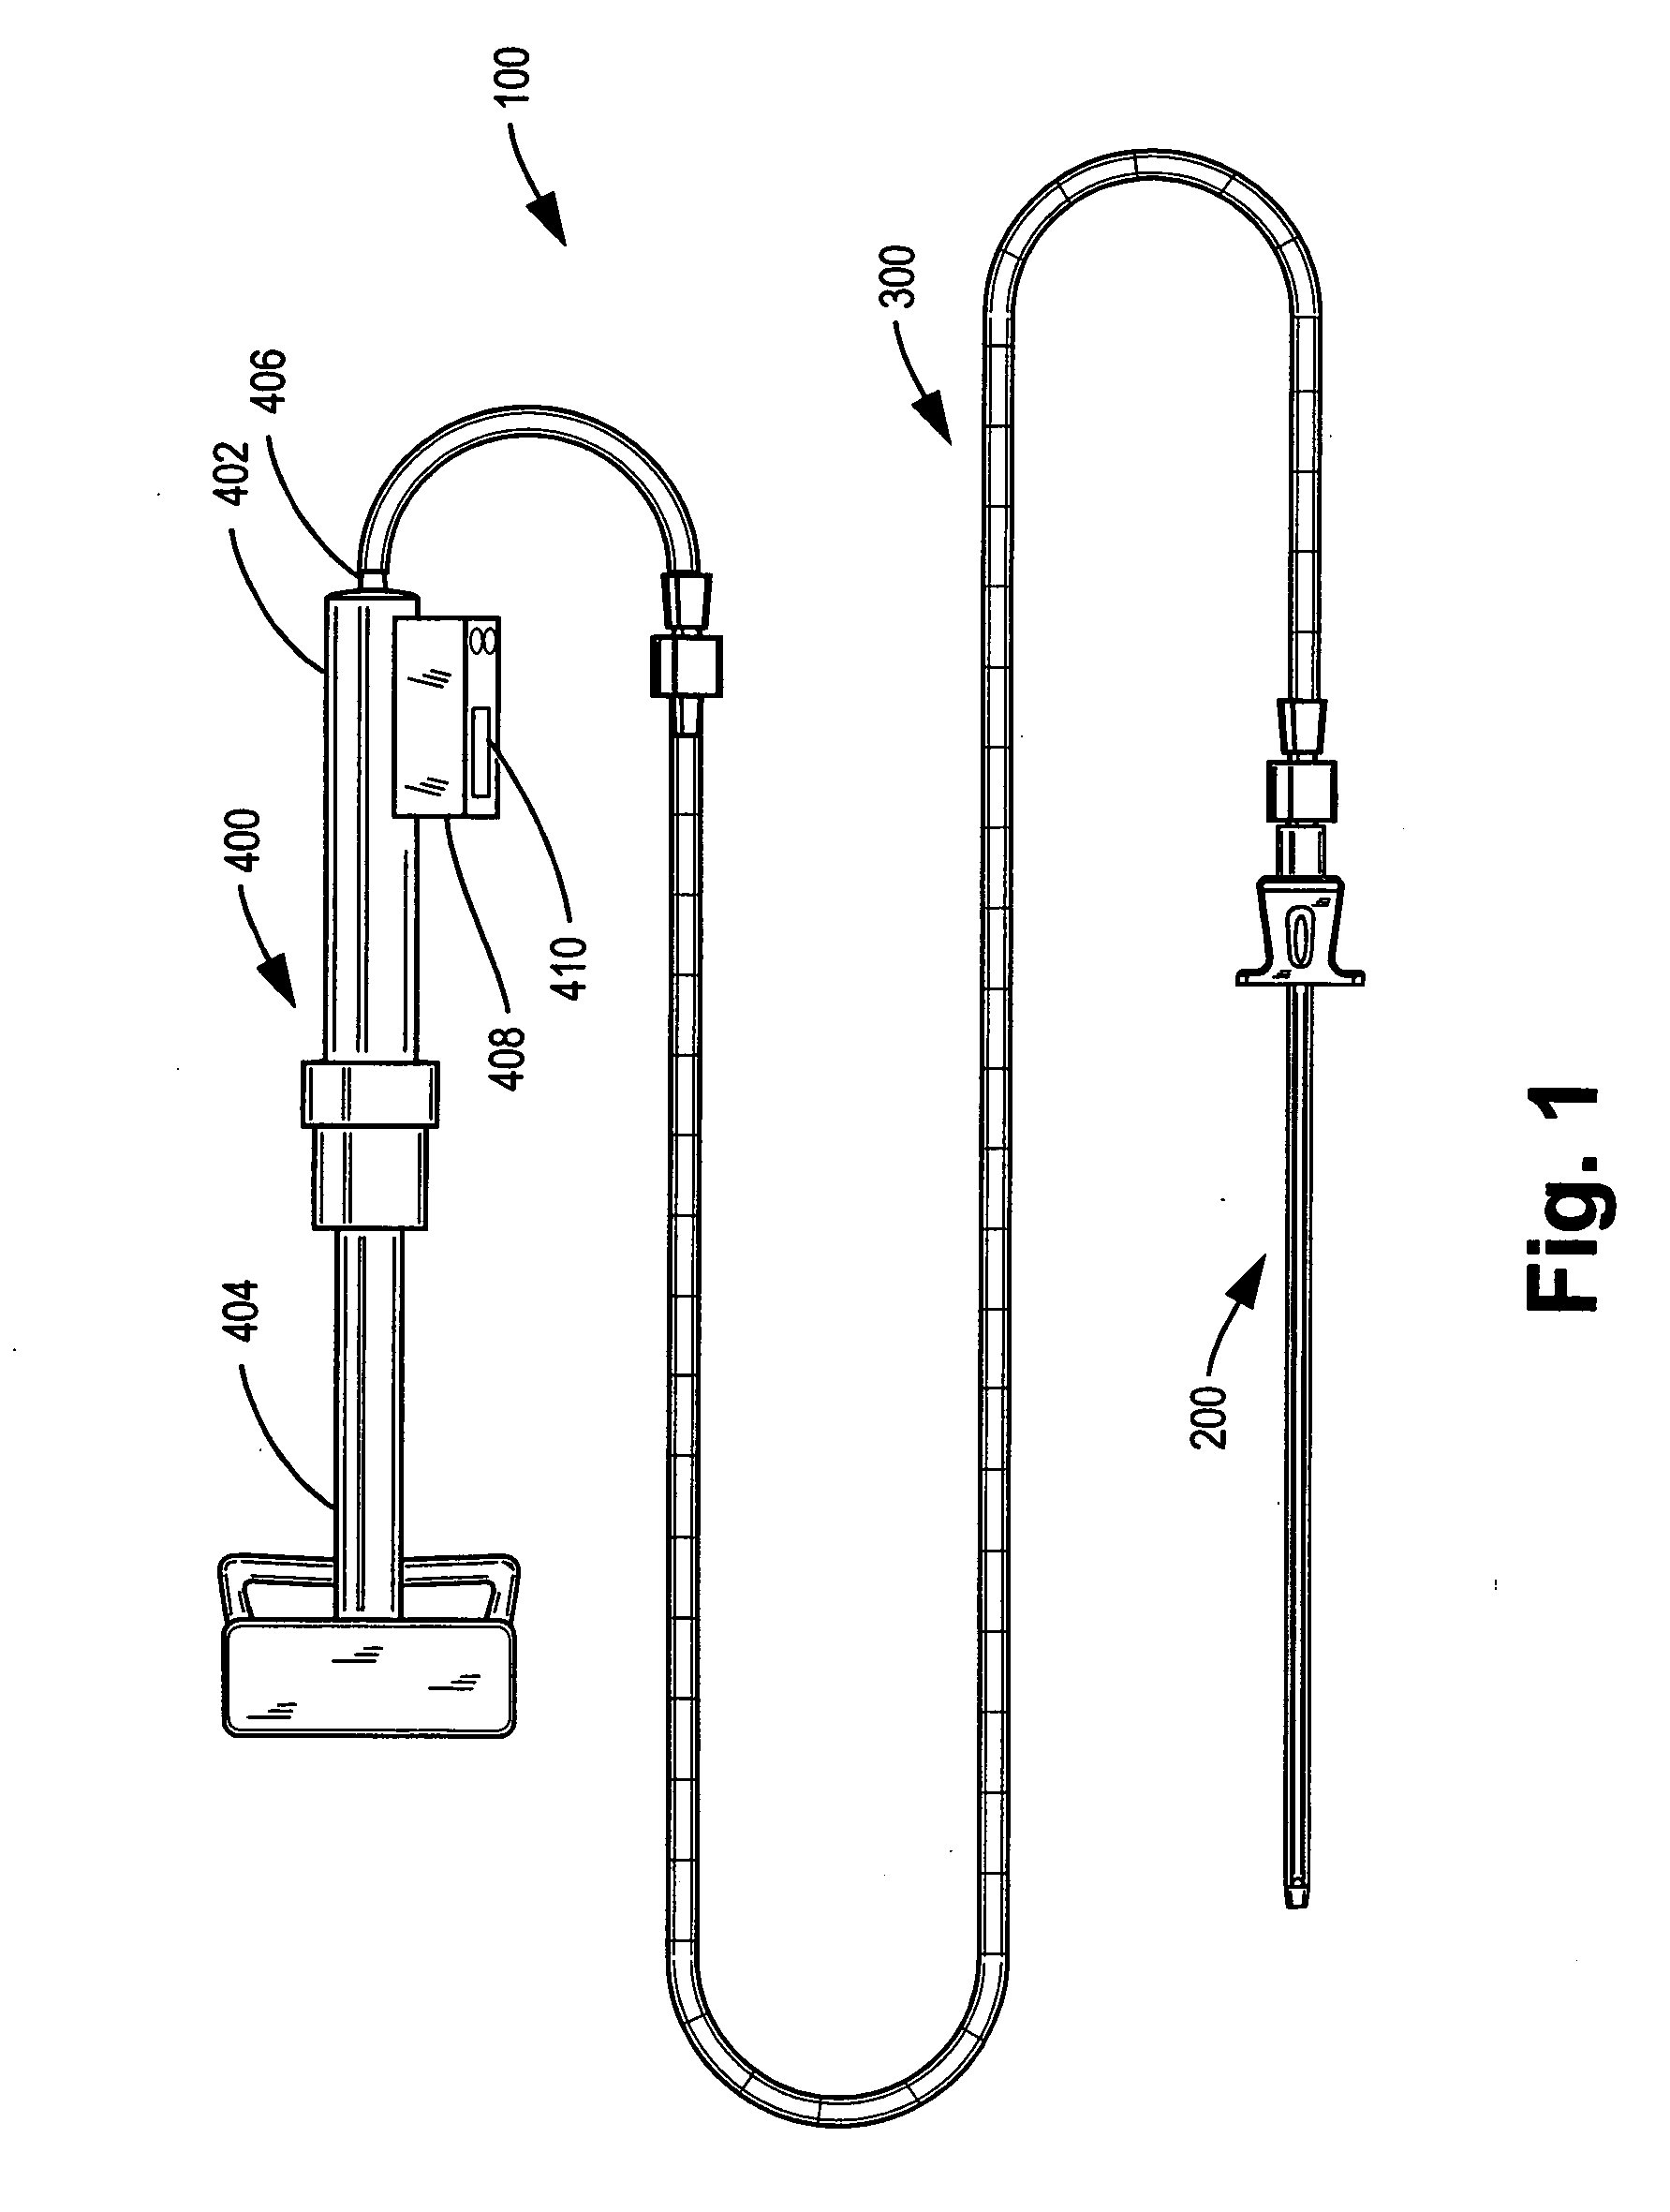 Method and apparatus for implanting a hydrogel prosthesis for a nucleus pulposus